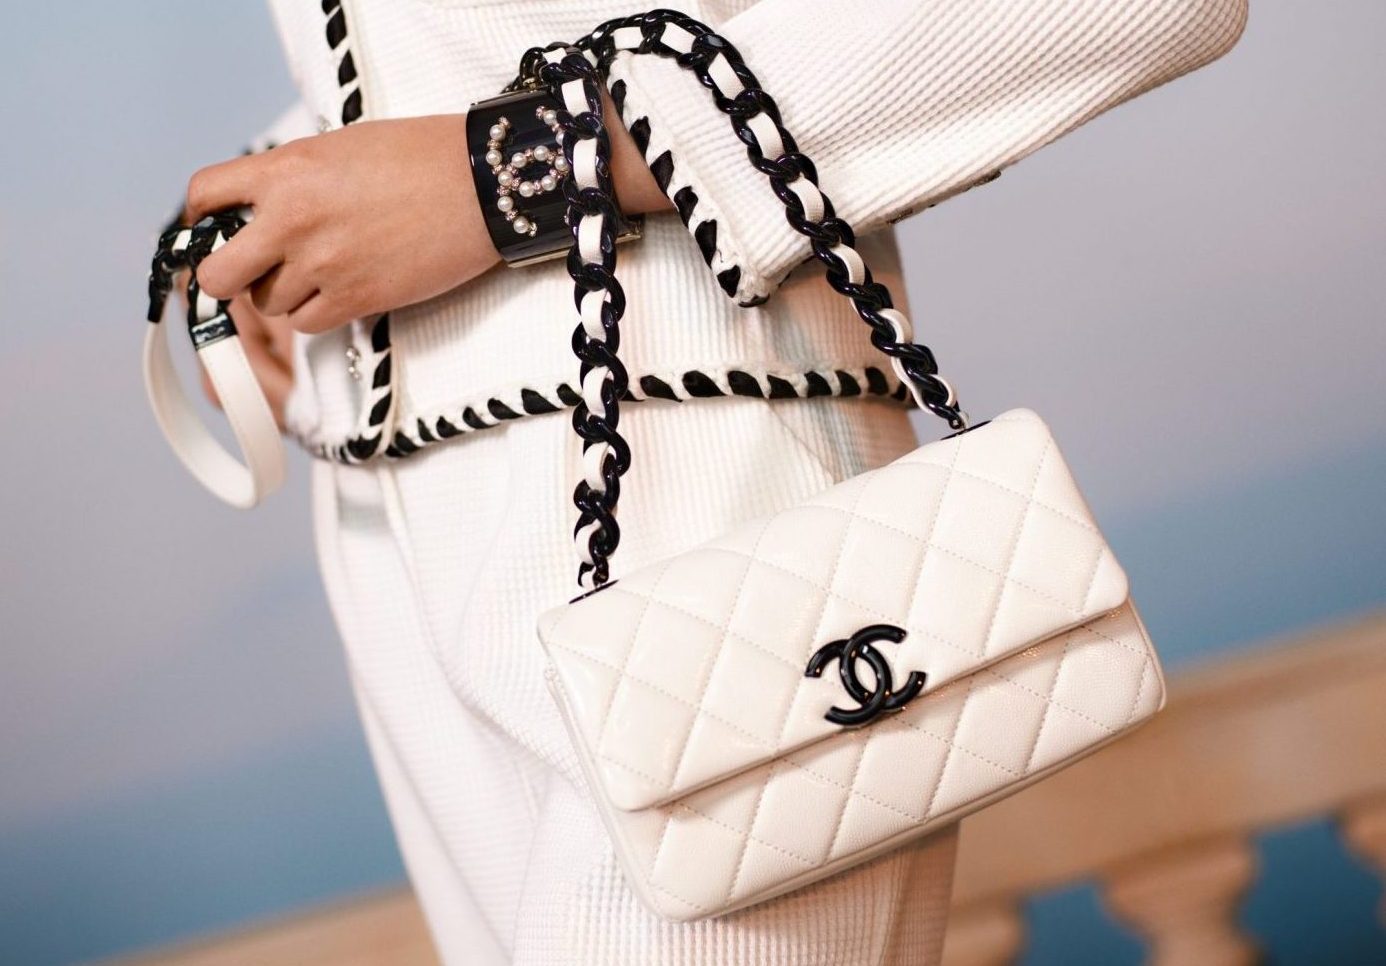 most popular chanel bags 2019